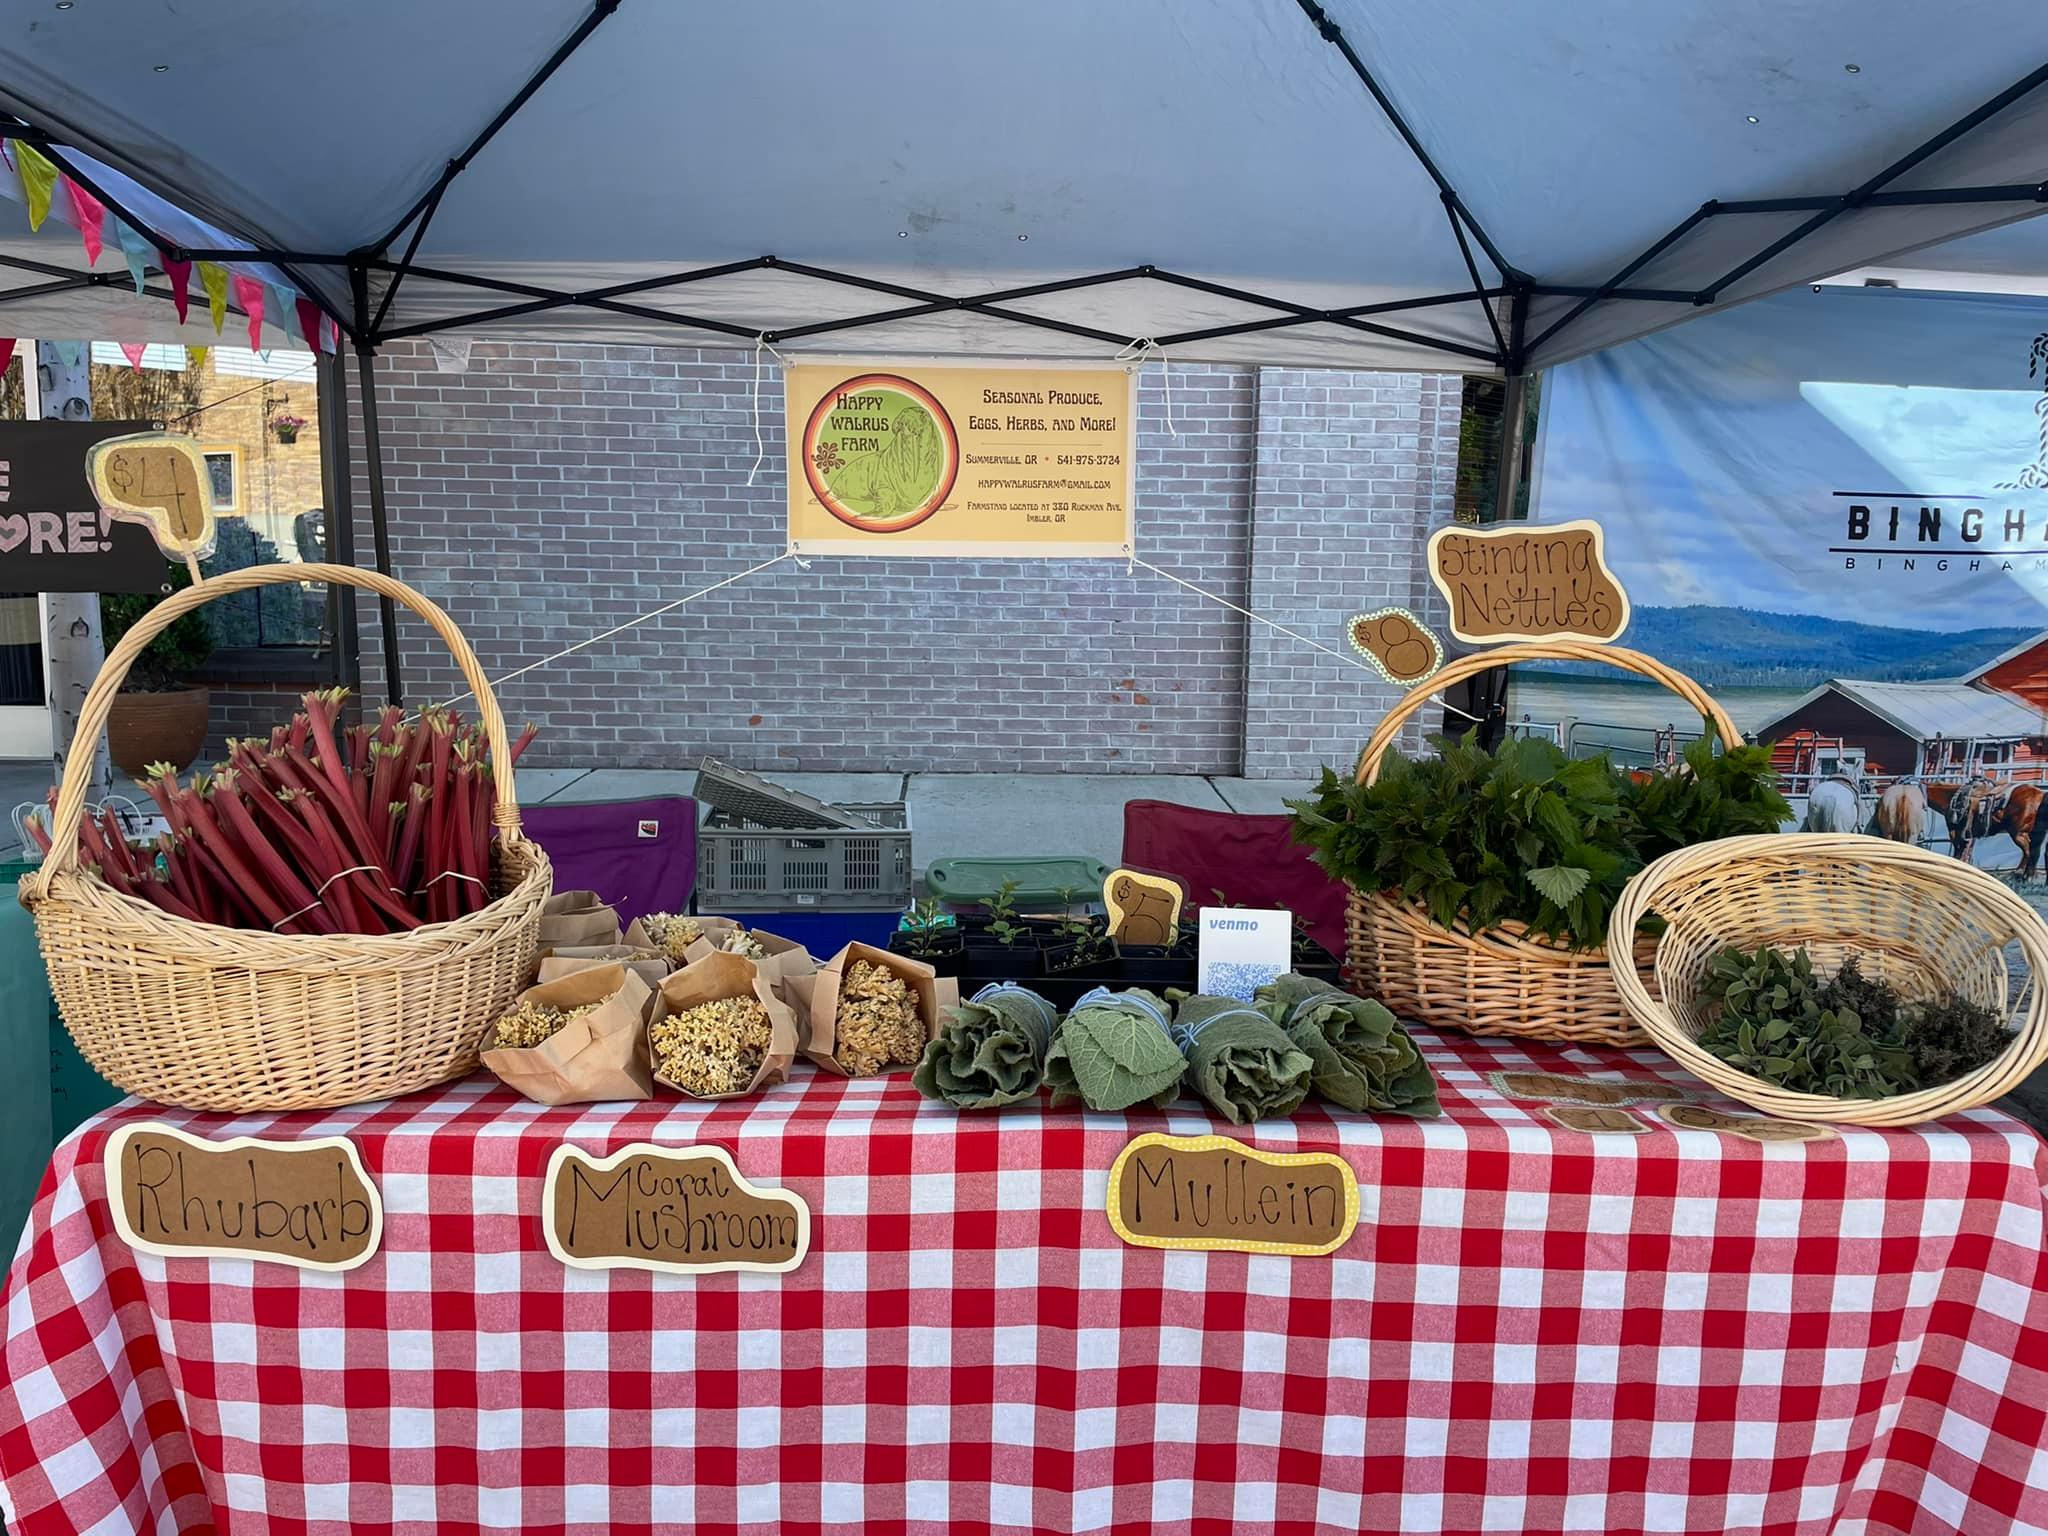 Farmers market vendor booth with baskets of produce and herbs on display